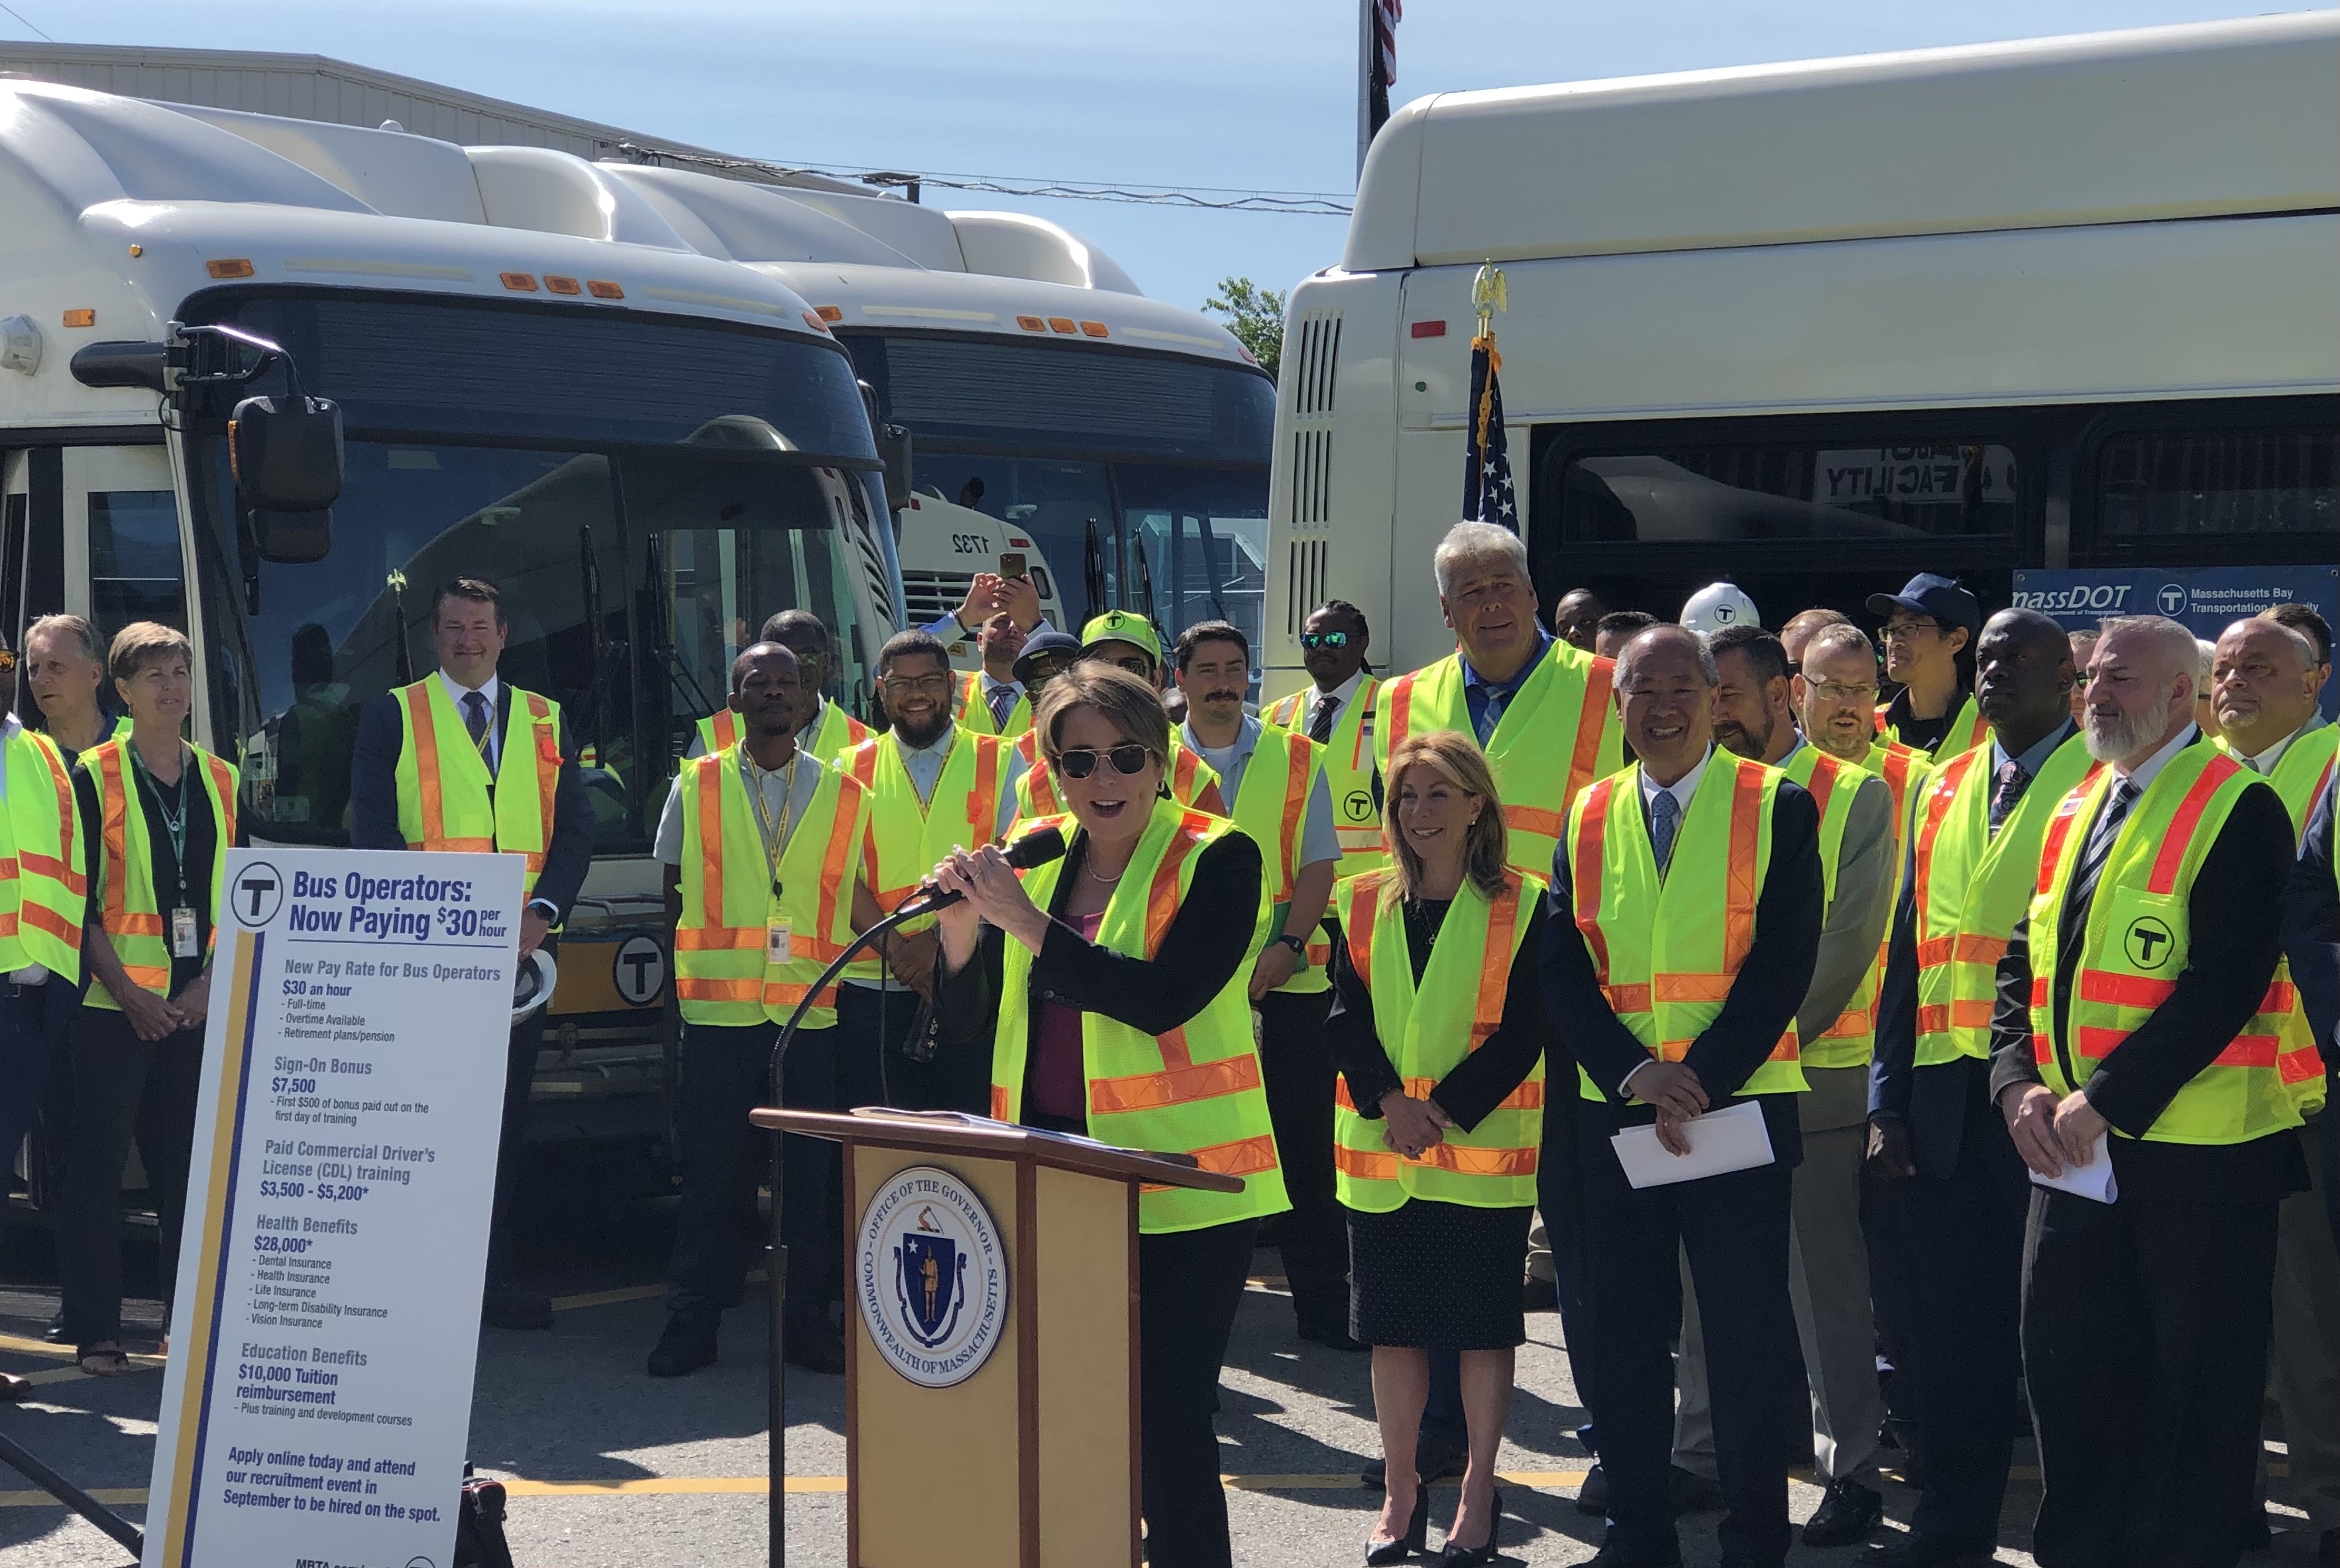 A crowd of people in yellow flourescent safety vests stands behind a podium where the Massachusetts Governor is speaking. To her left is a poster that outlines the new wages and benefits for newly-hired bus drivers under the terms of a new labor deal, with a $30 per hour wage in bold lettering at the top.